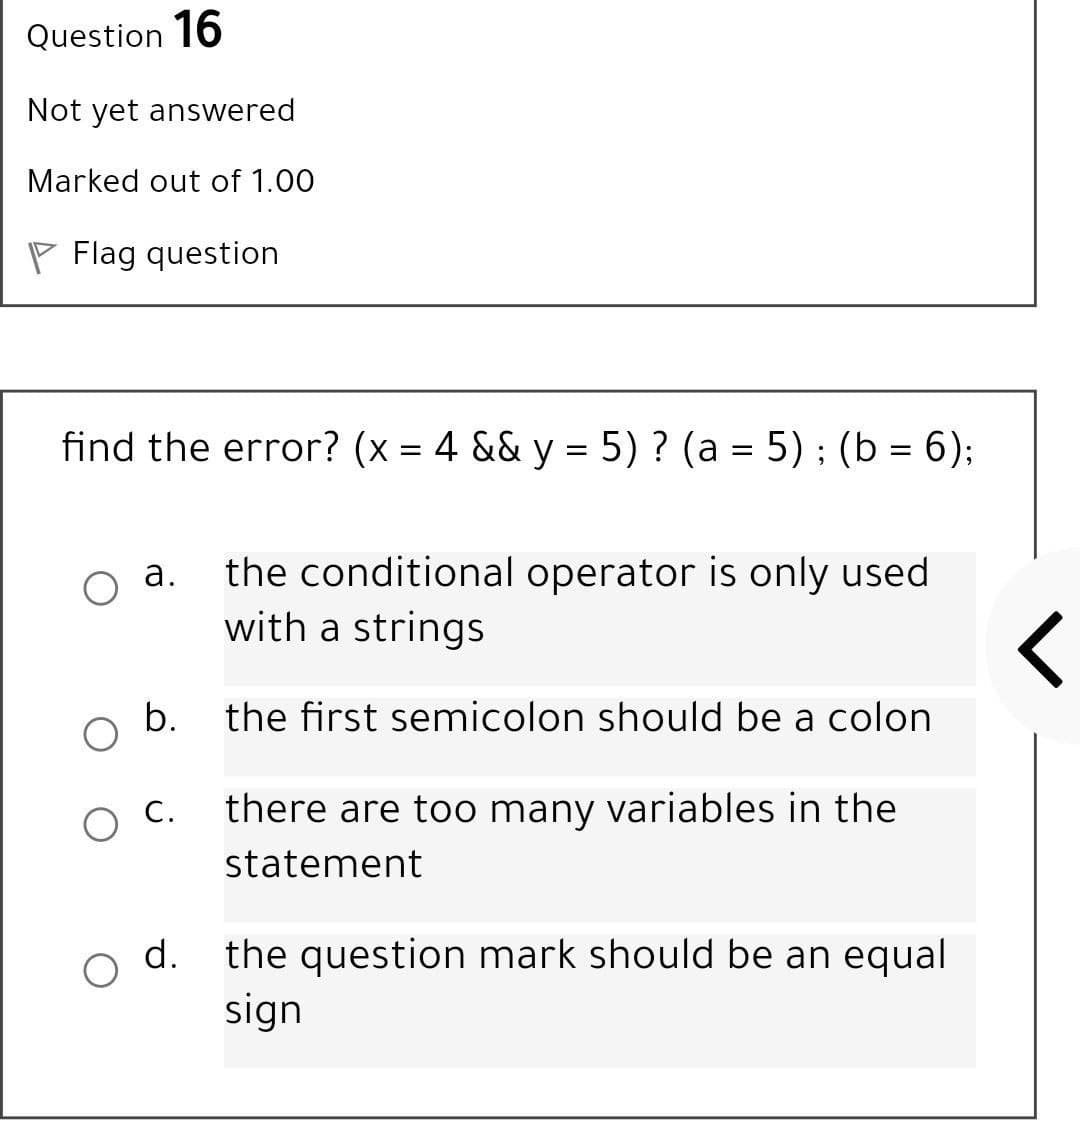 Question 16
Not yet answered
Marked out of 1.00
Flag question
find the error? (x = 4 && y = 5) ? (a = 5); (b = 6);
||
the conditional operator is only used
with a strings
а.
b.
the first semicolon should be a colon
O C.
there are too many variables in the
statement
the question mark should be an equal
sign
d.
